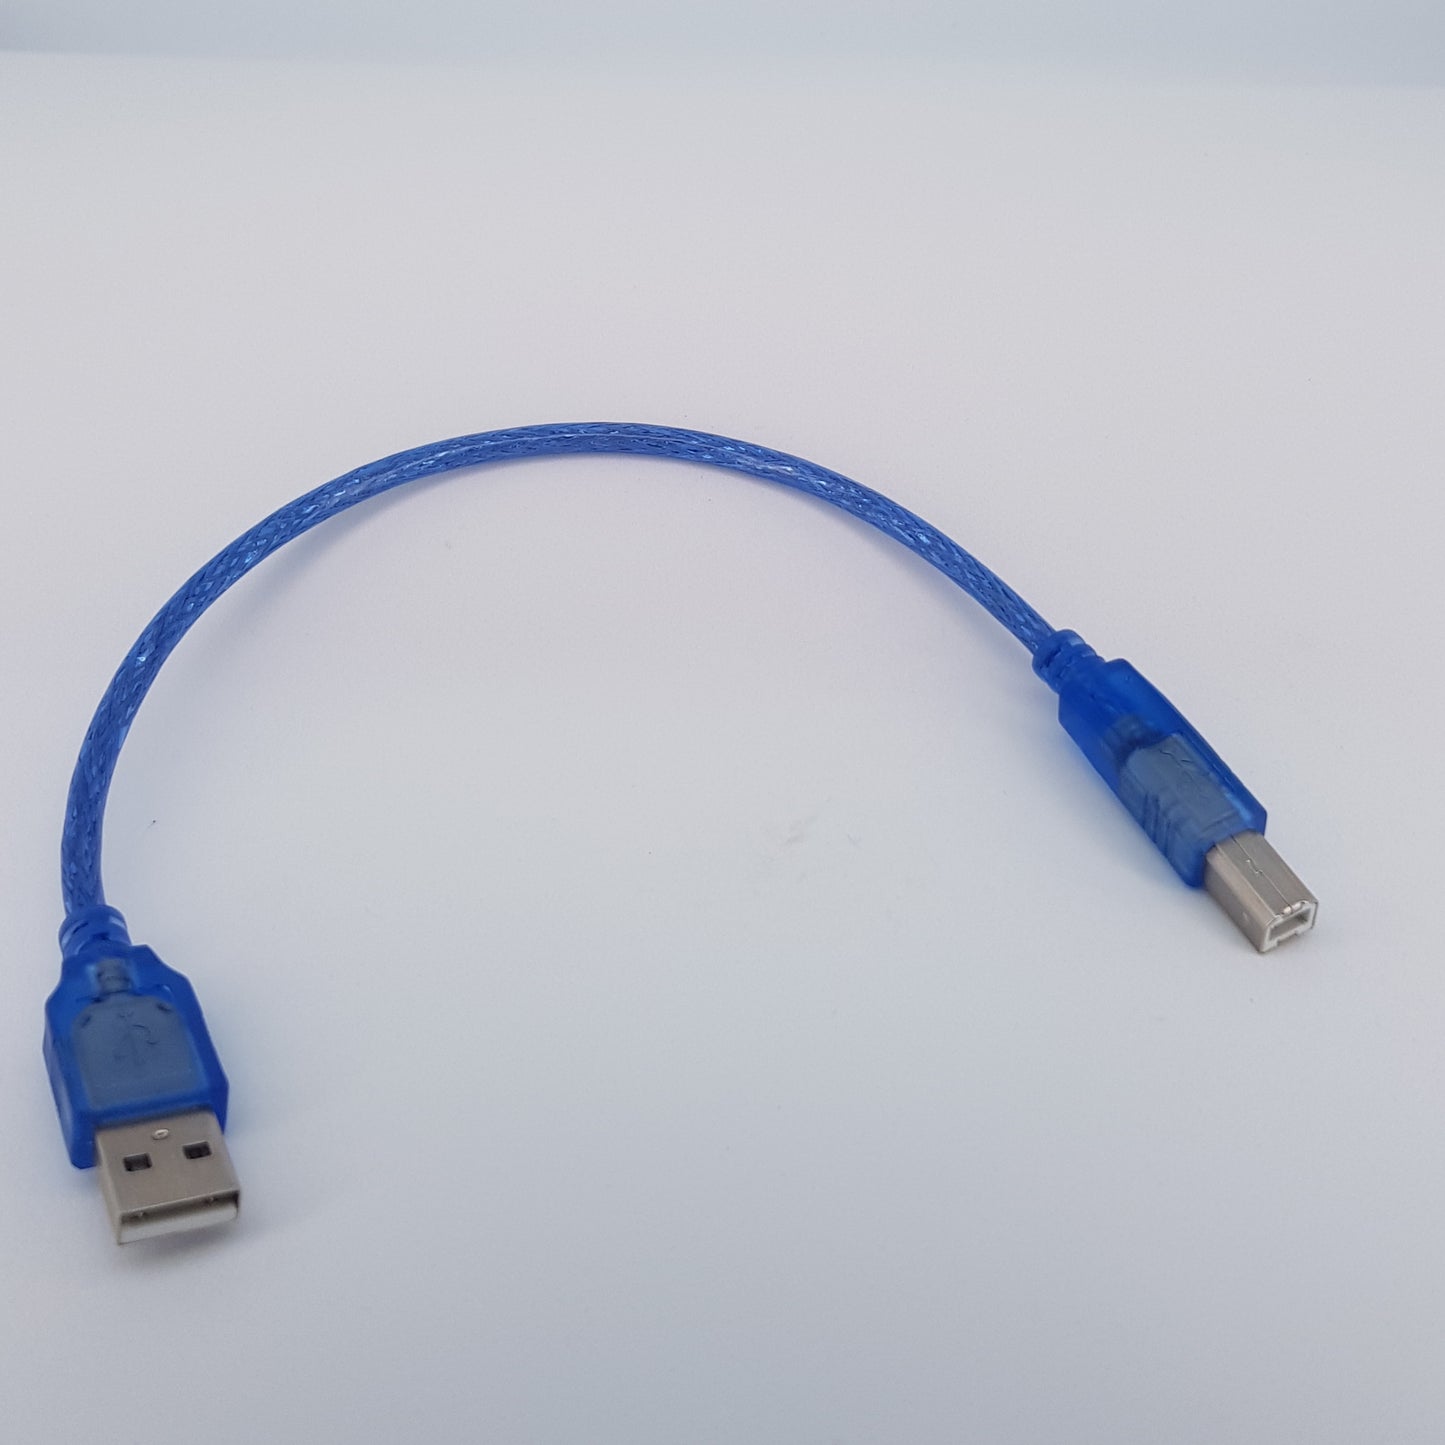 Generic USB A to USB B cable